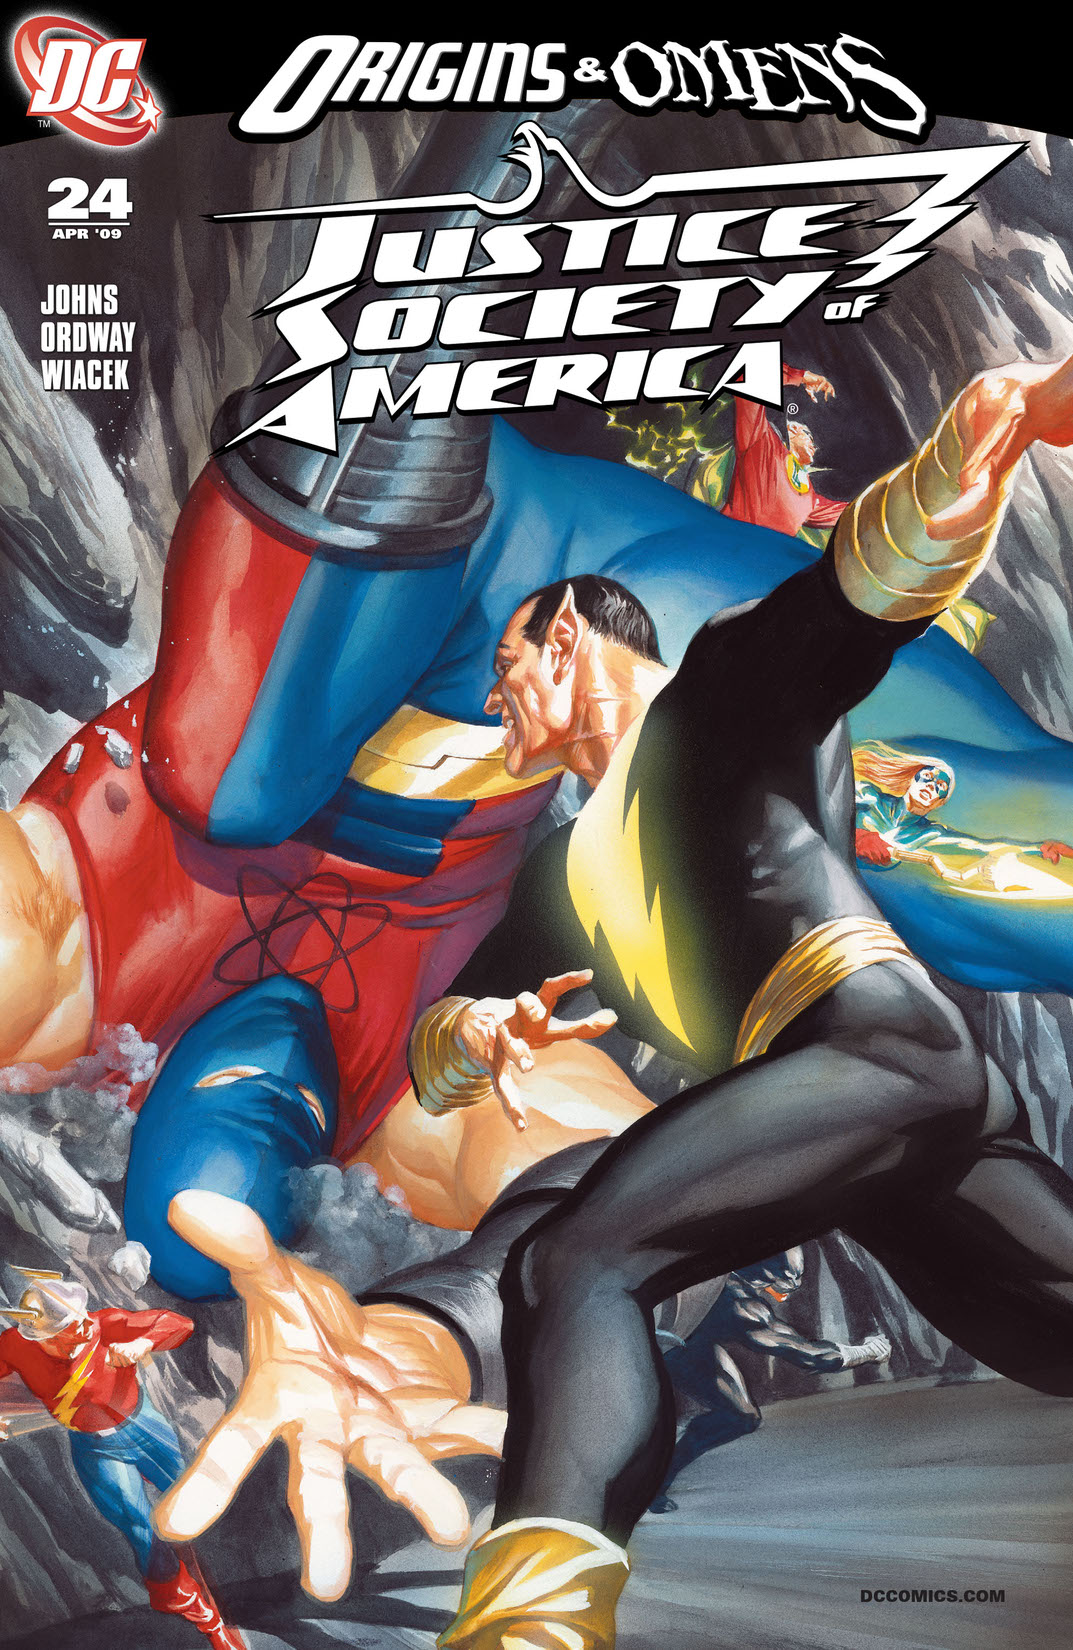 Justice Society of America (2006-) #24 preview images